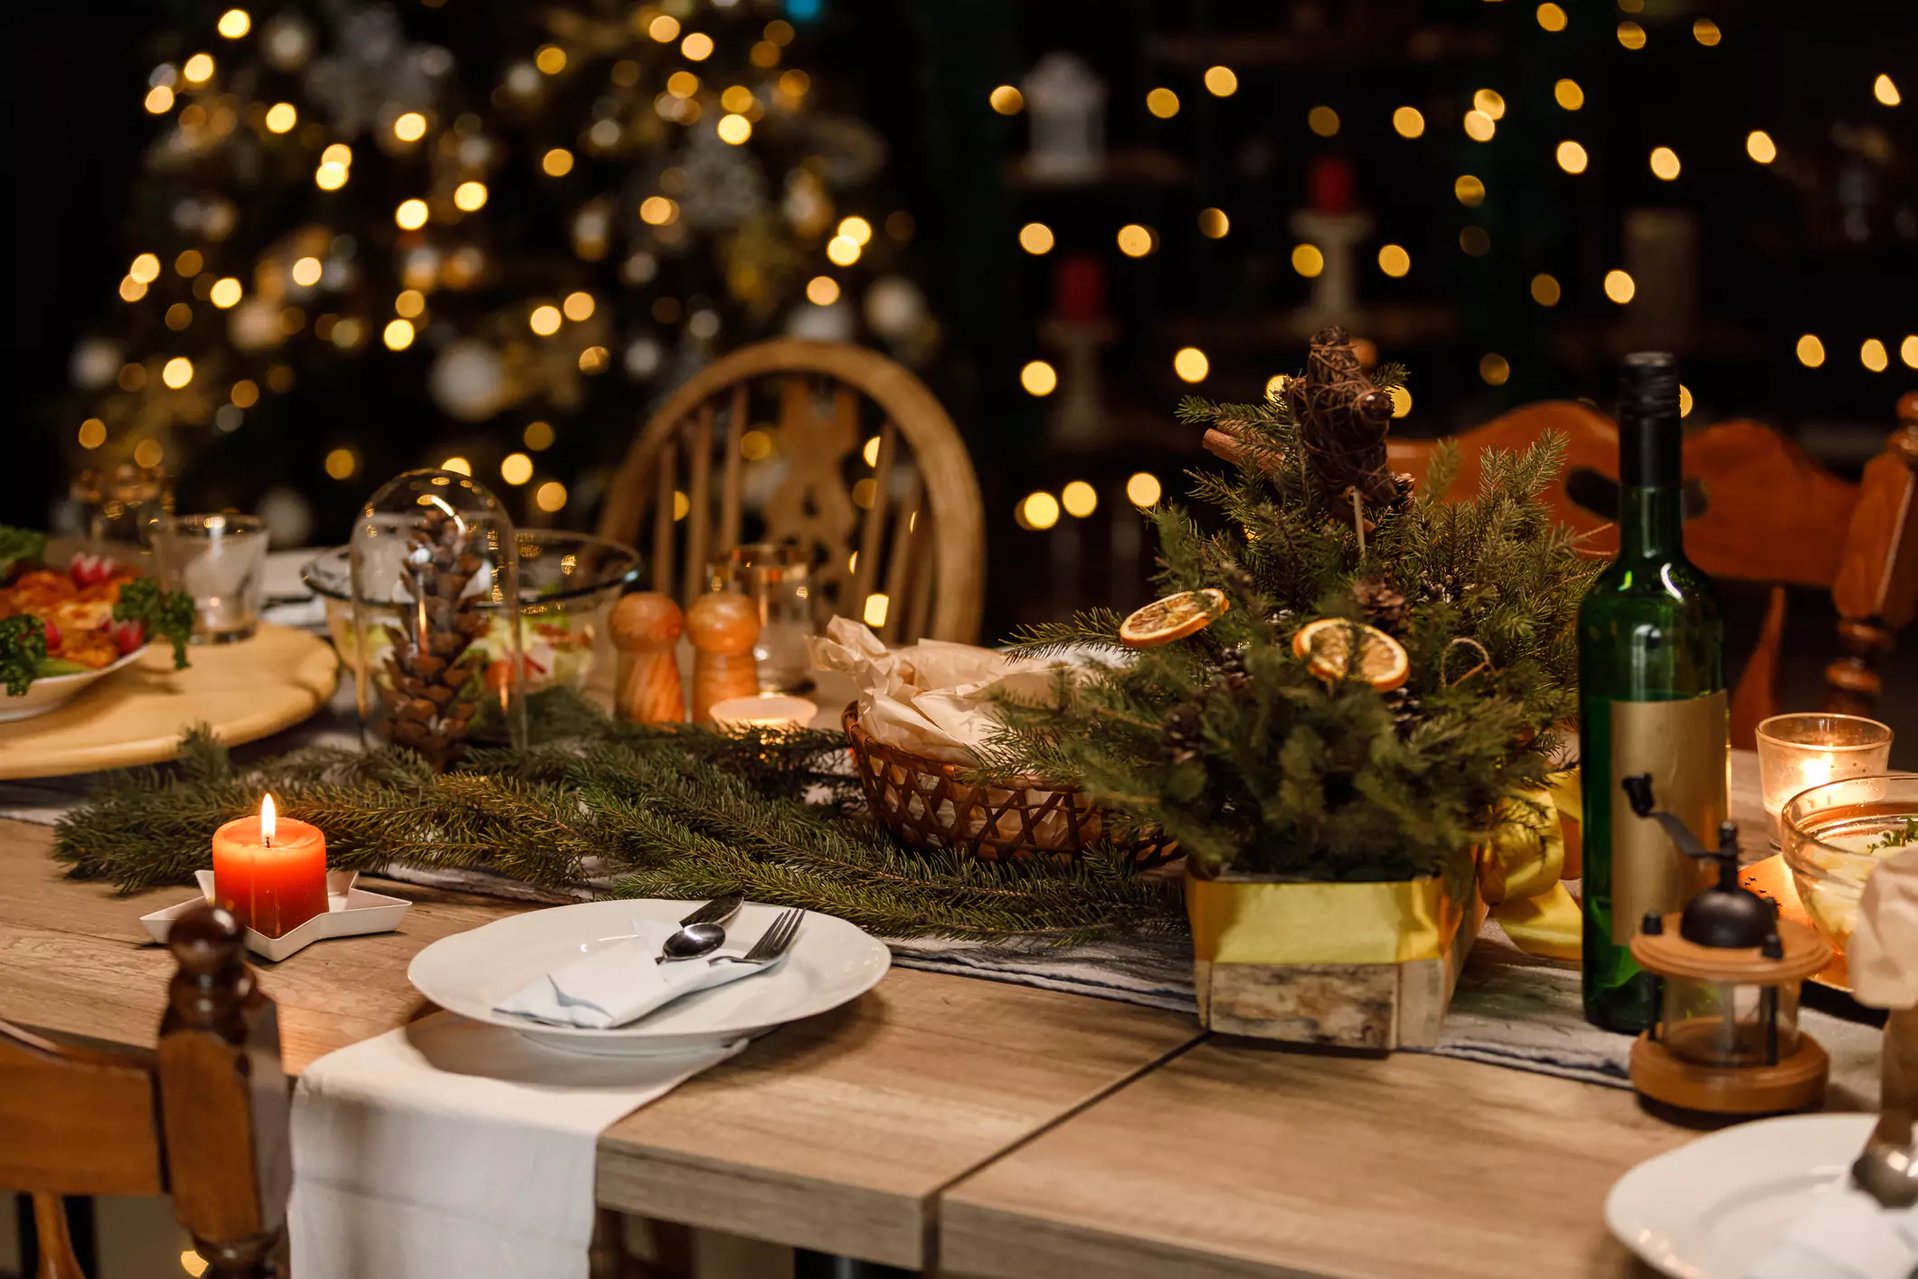 Christmas tablescape with fairlights and foliage